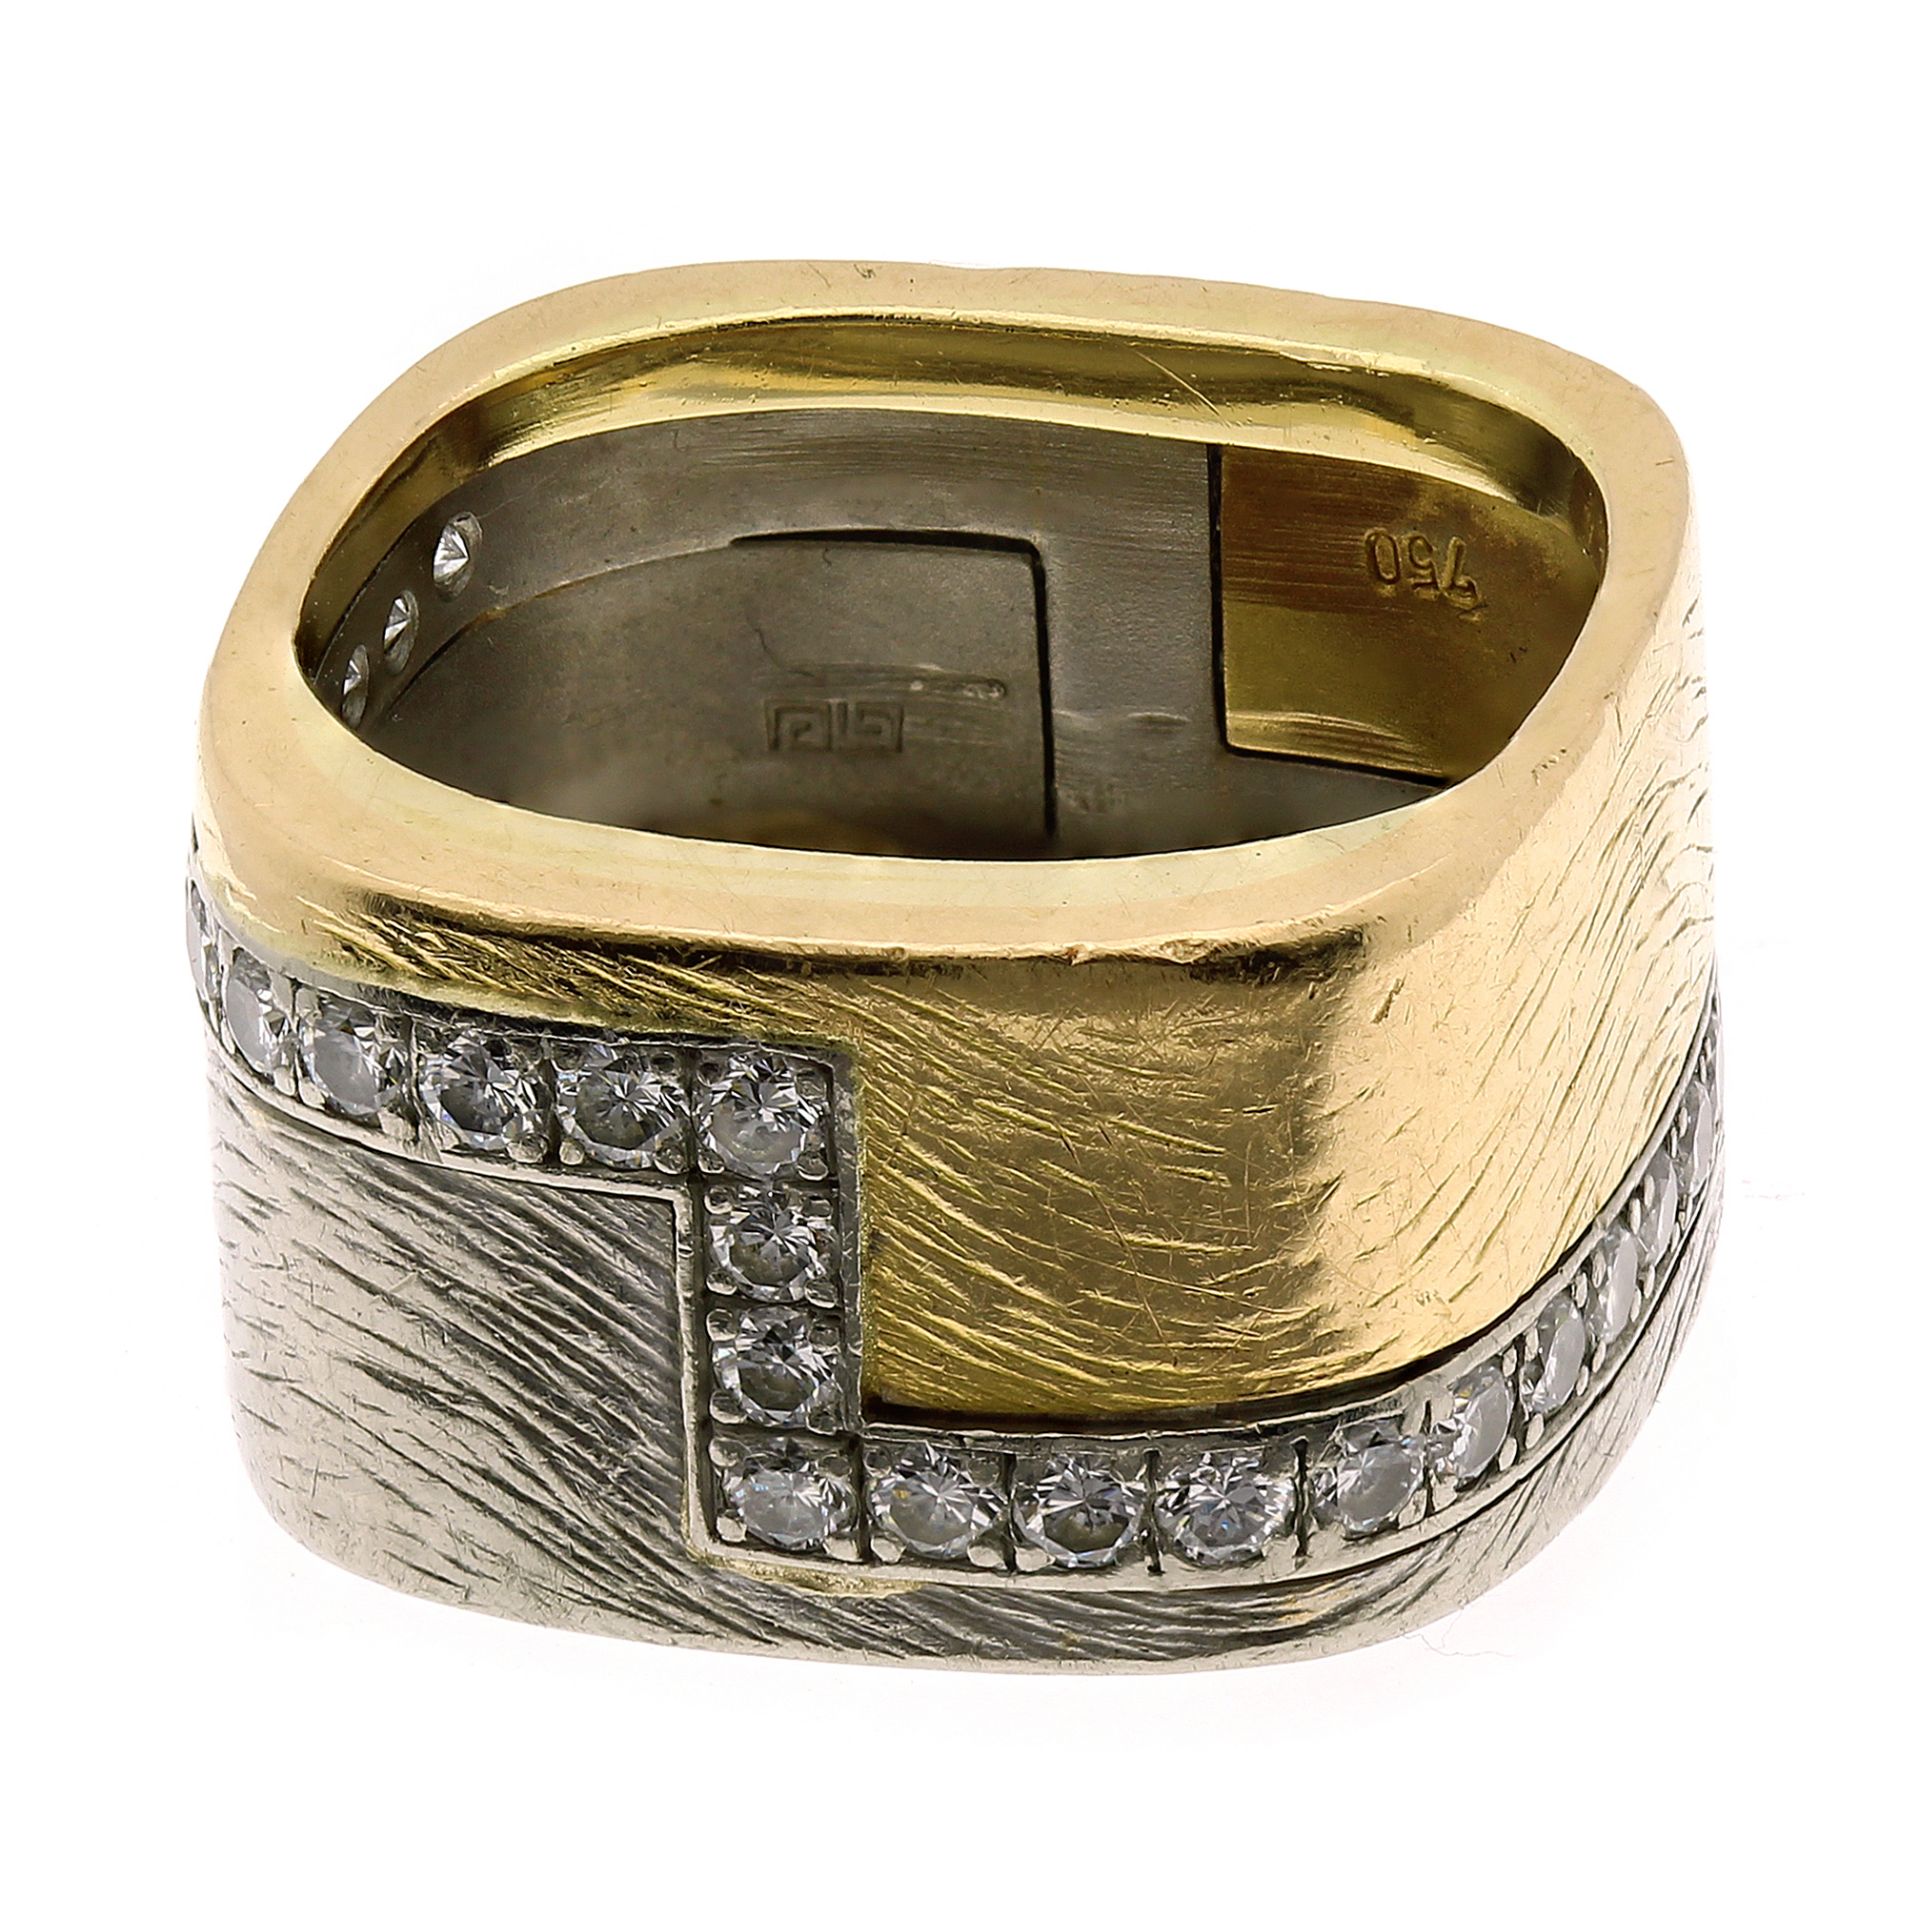 A DIAMOND DRESS RING, PAUL BINDER in 18ct yellow and white gold, the bi-colour band divided by a row